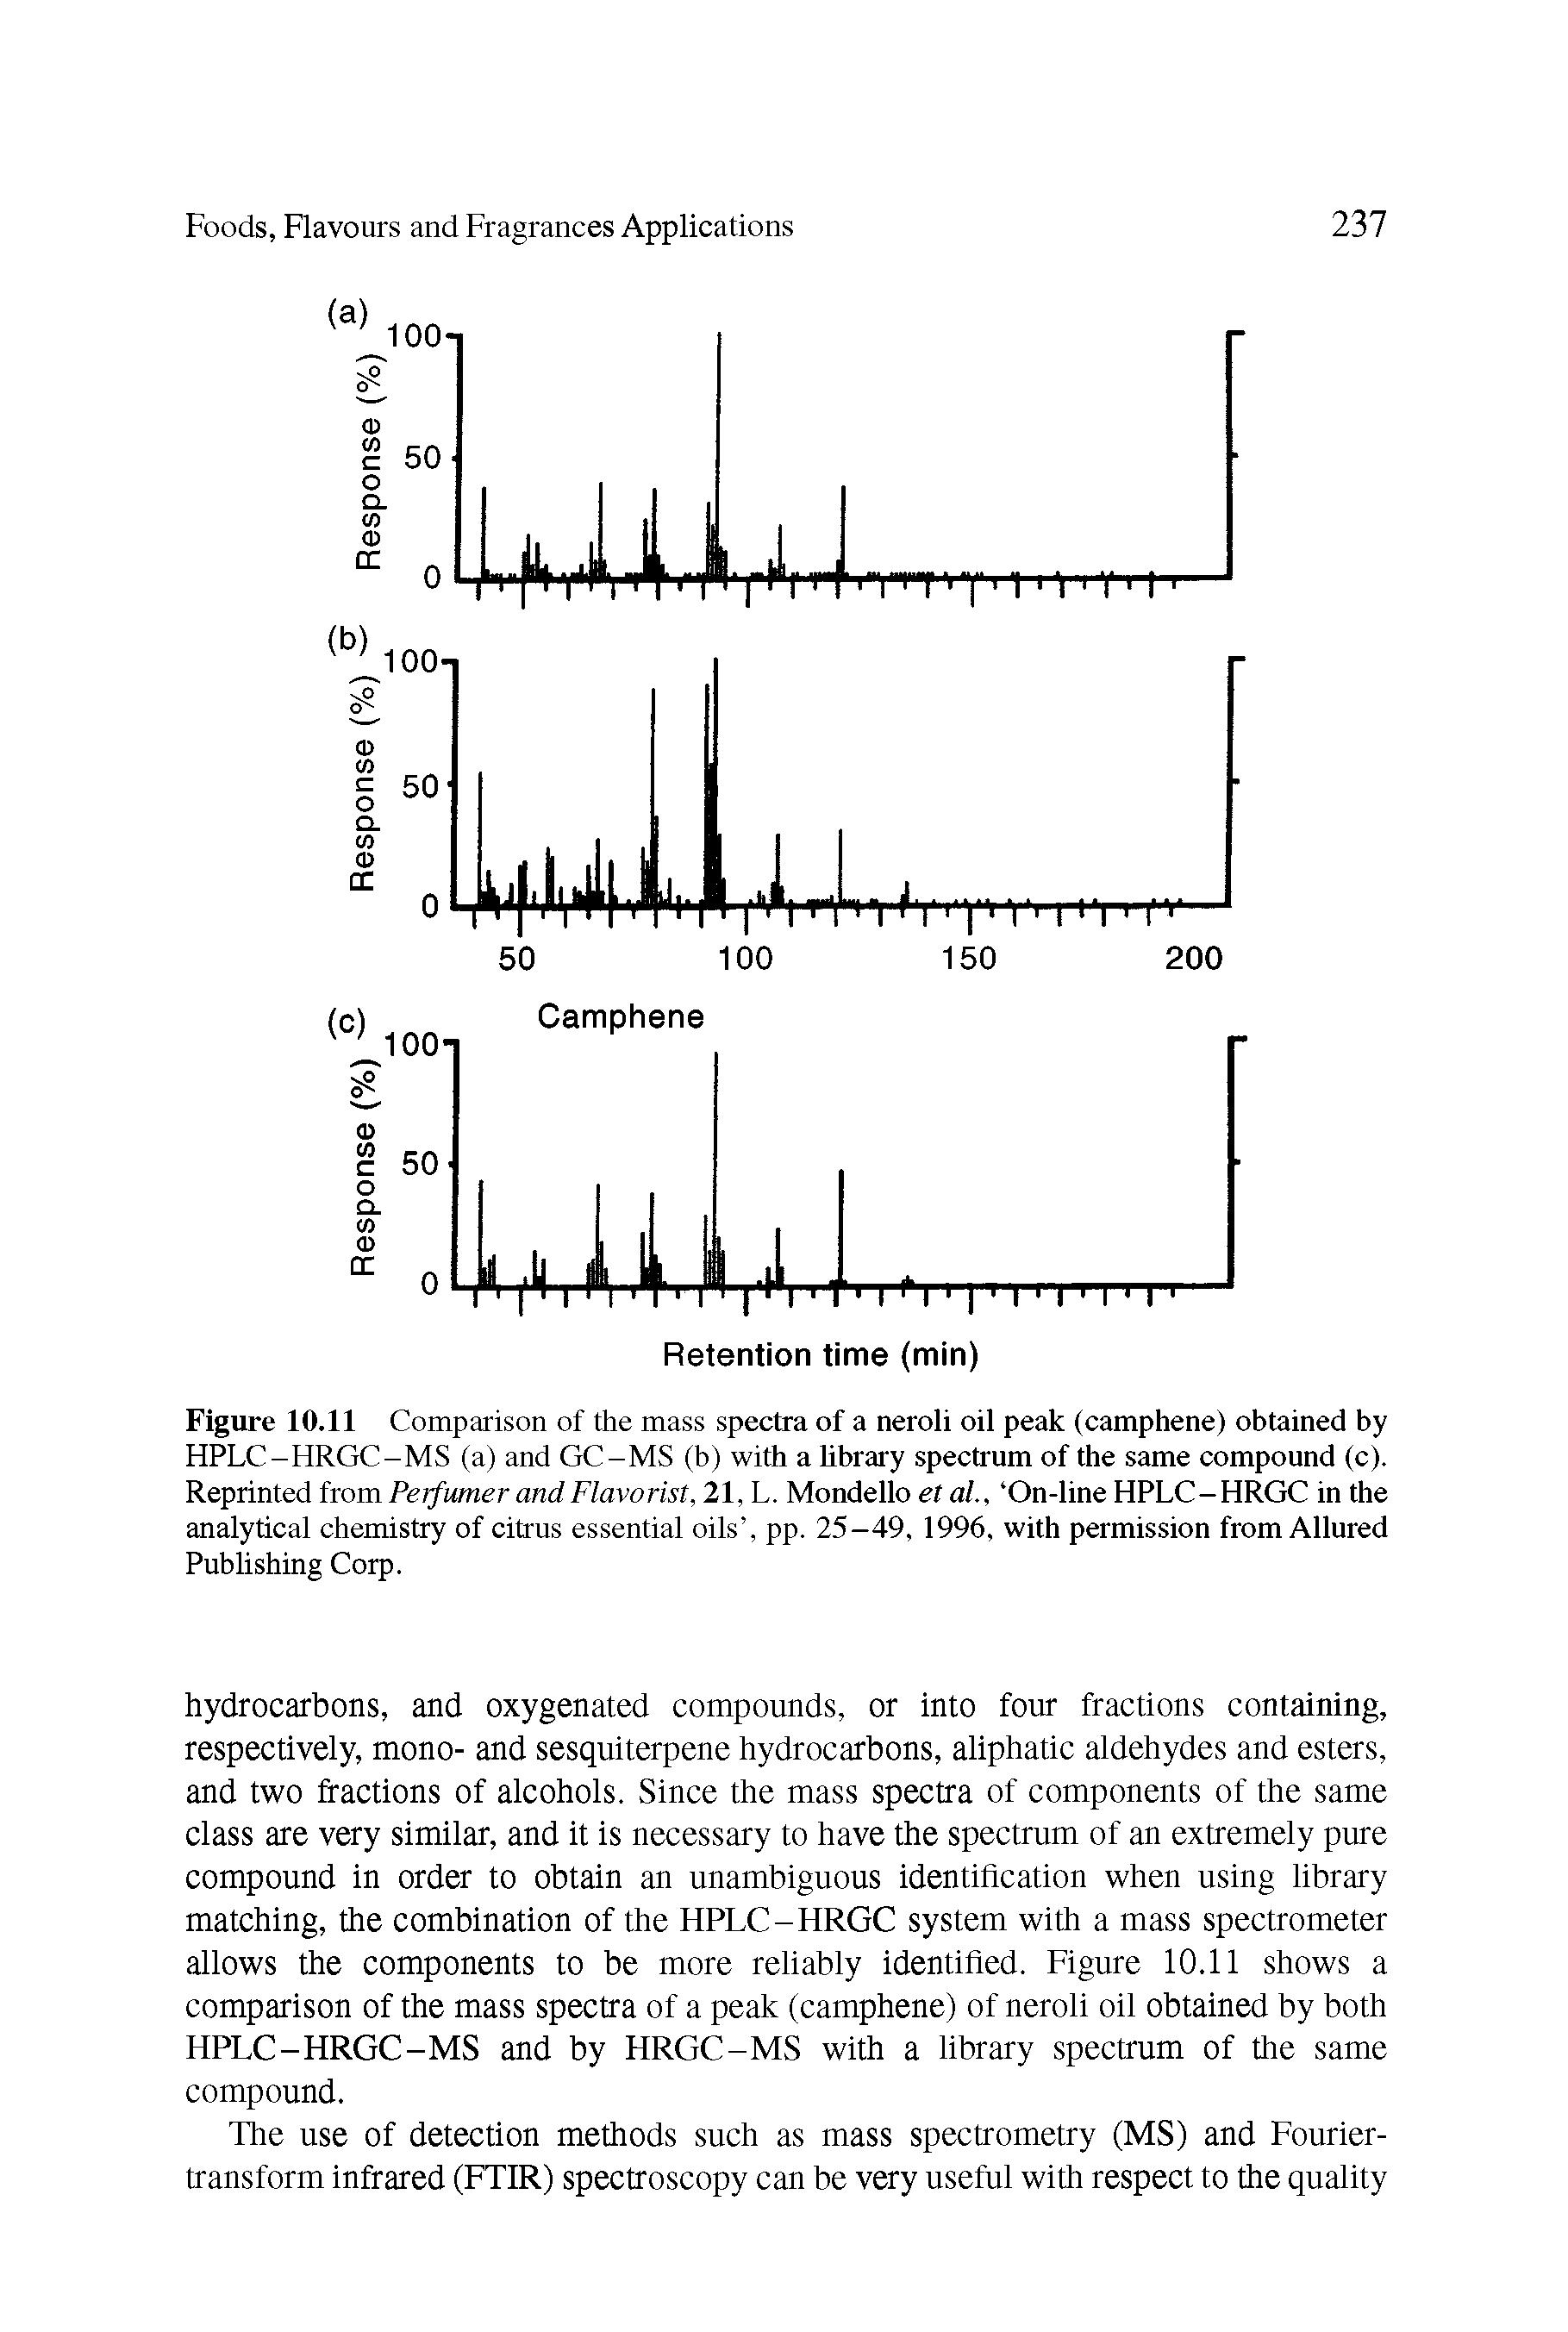 Figure 10.11 Comparison of the mass spectra of a neroli oil peak (camphene) obtained by HPLC-HRGC-MS (a) and GC-MS (b) with a library spectrum of the same compound (c). Reprinted from Perfumer and Flavorist, 21, L. Mondello et al., On-line HPLC-HRGC in the analytical chemistry of citrus essential oils , pp. 25-49, 1996, with permission from Allured Publishing Corp.